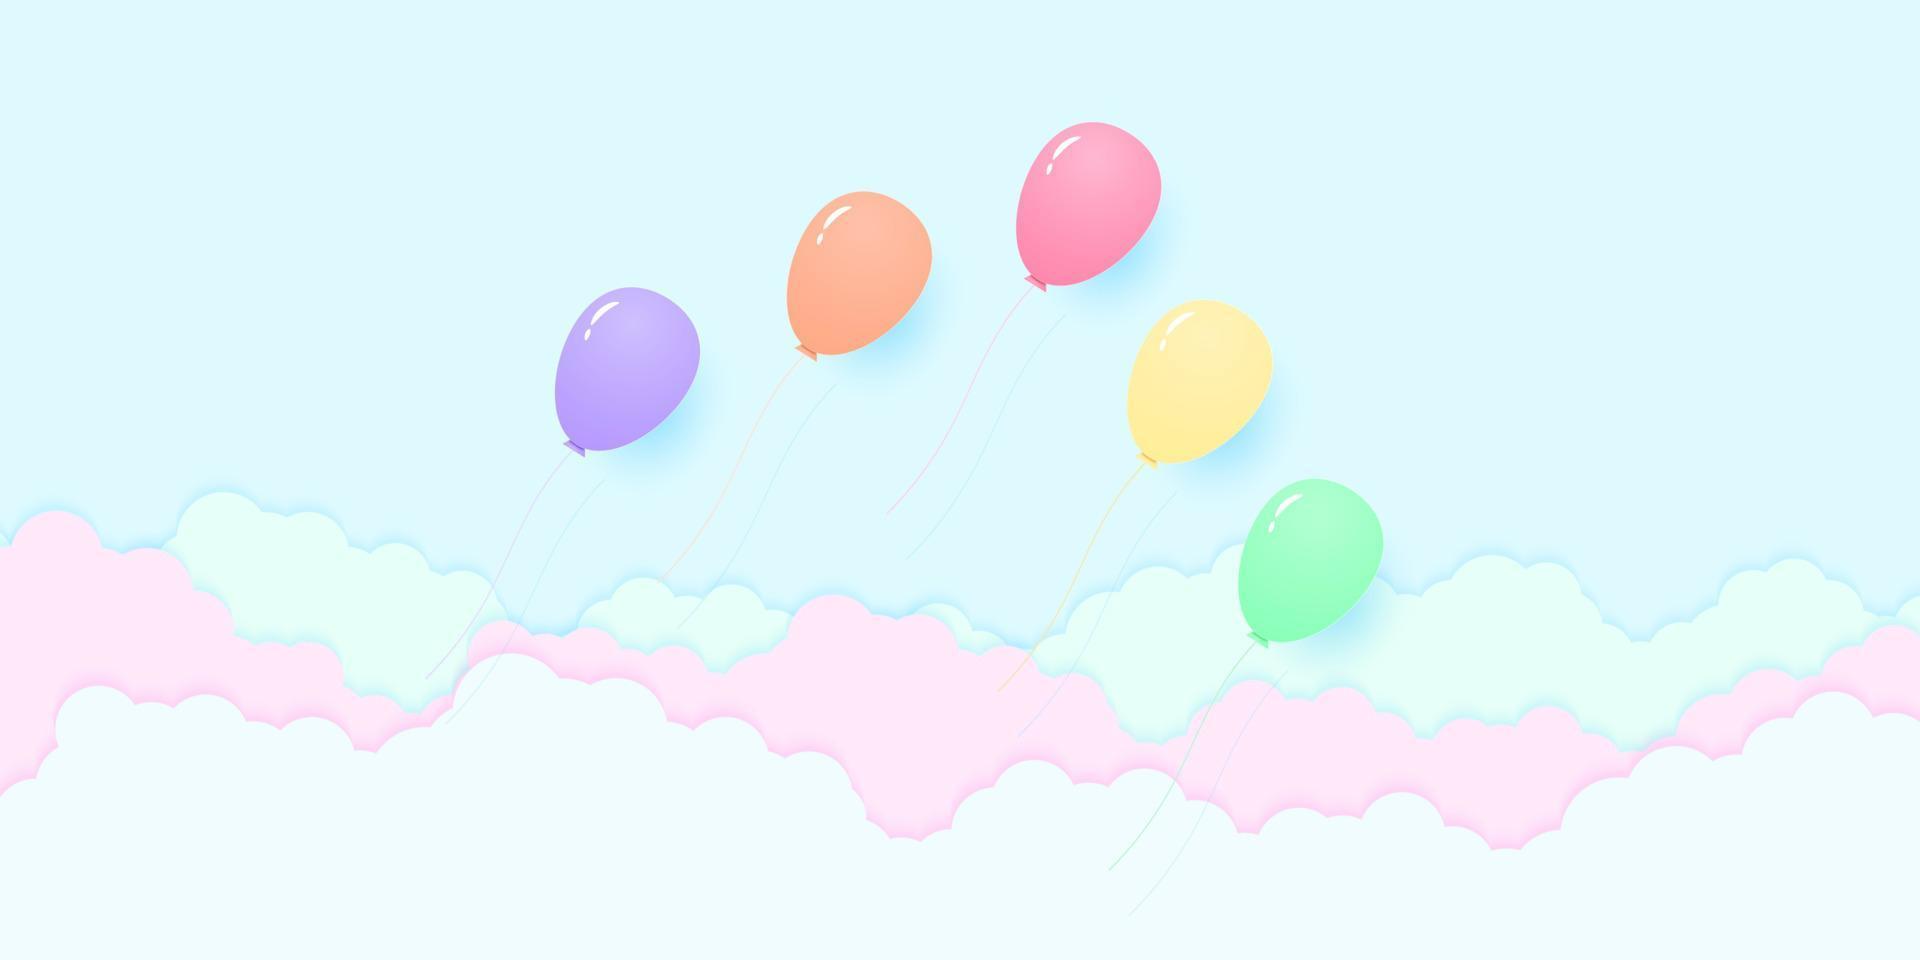 colorful pastel color balloons flying in the sky, rainbow color pattern, paper art style vector